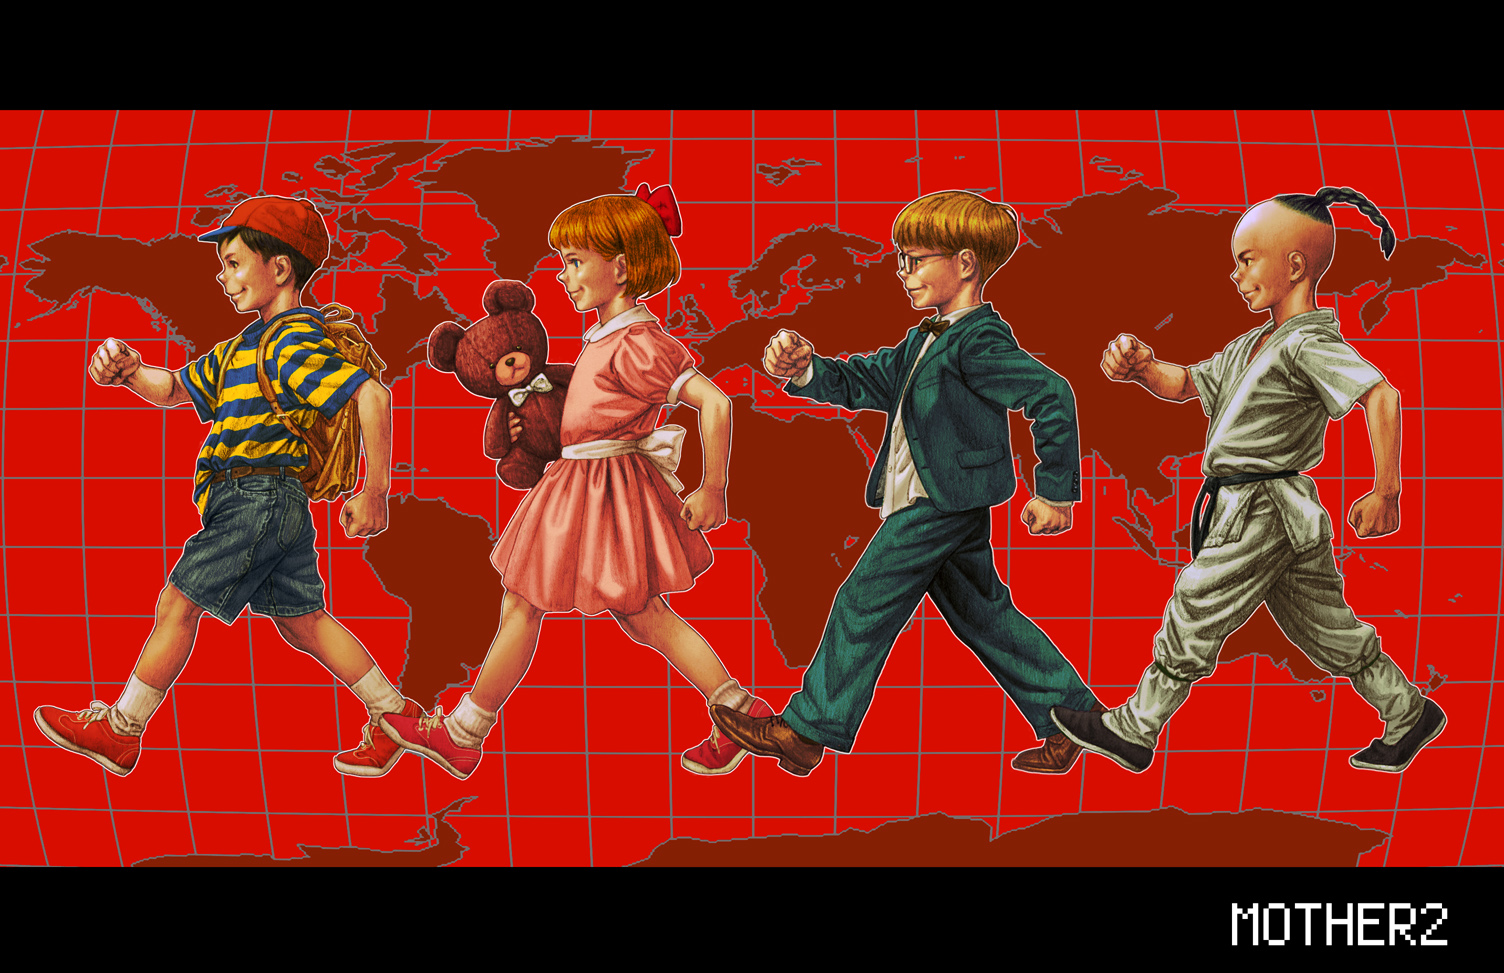 Geek insider, geekinsider, geekinsider. Com,, is it okay to charge $10 for earthbound? , gaming